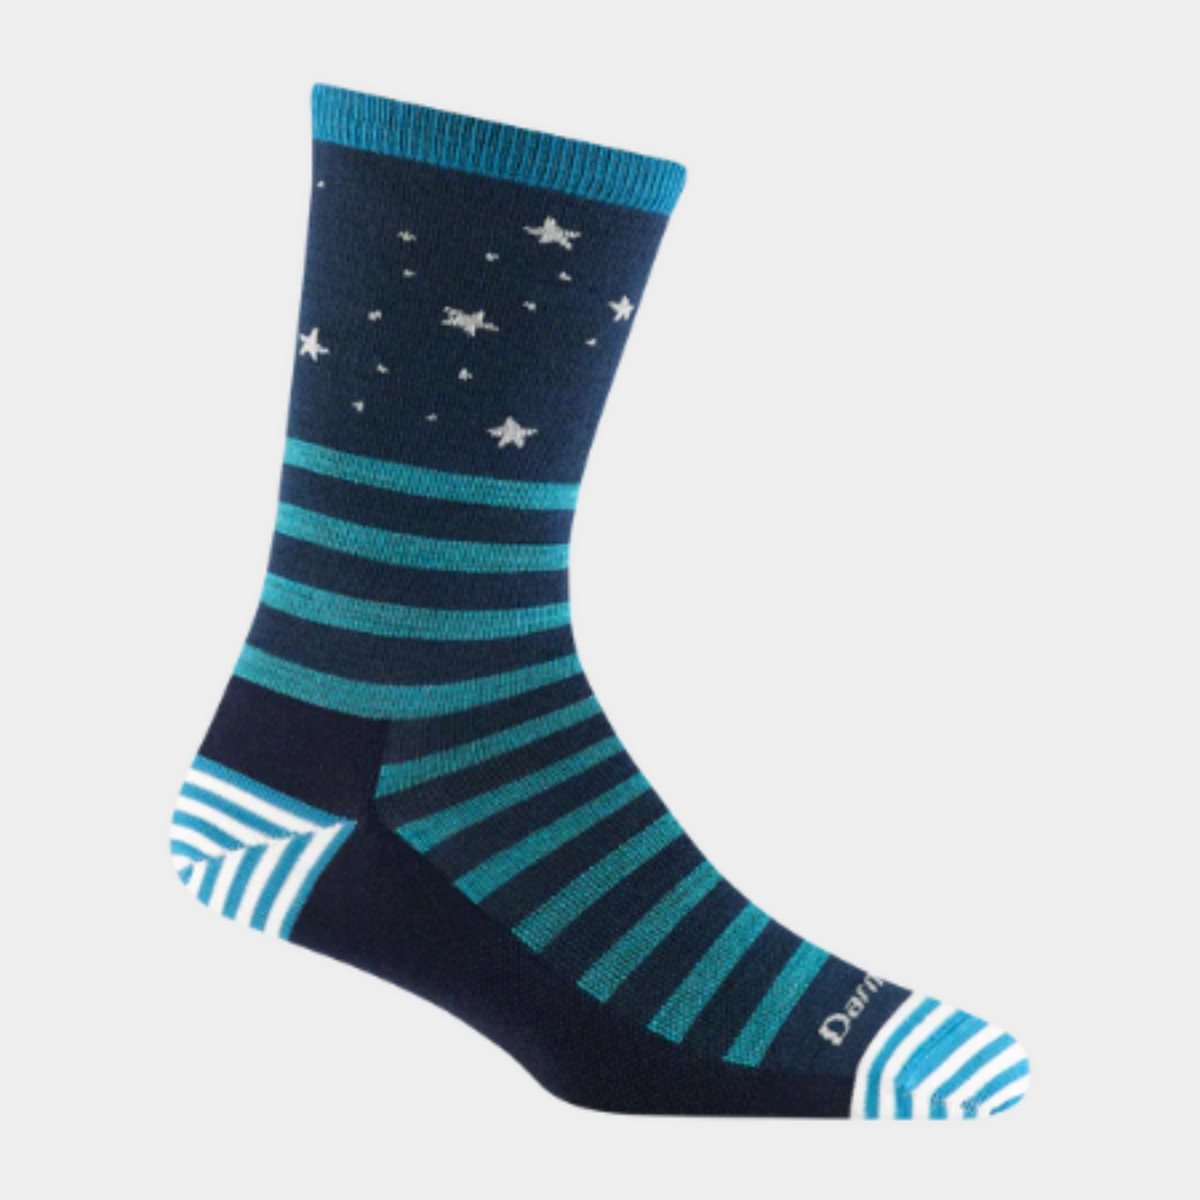 Darn Tough 6037 Animal Haus Lightweight Cushion Crew women&#39;s sock featuring navy blue sock with teal stripes and stars at top. Sock shown on display foot. 